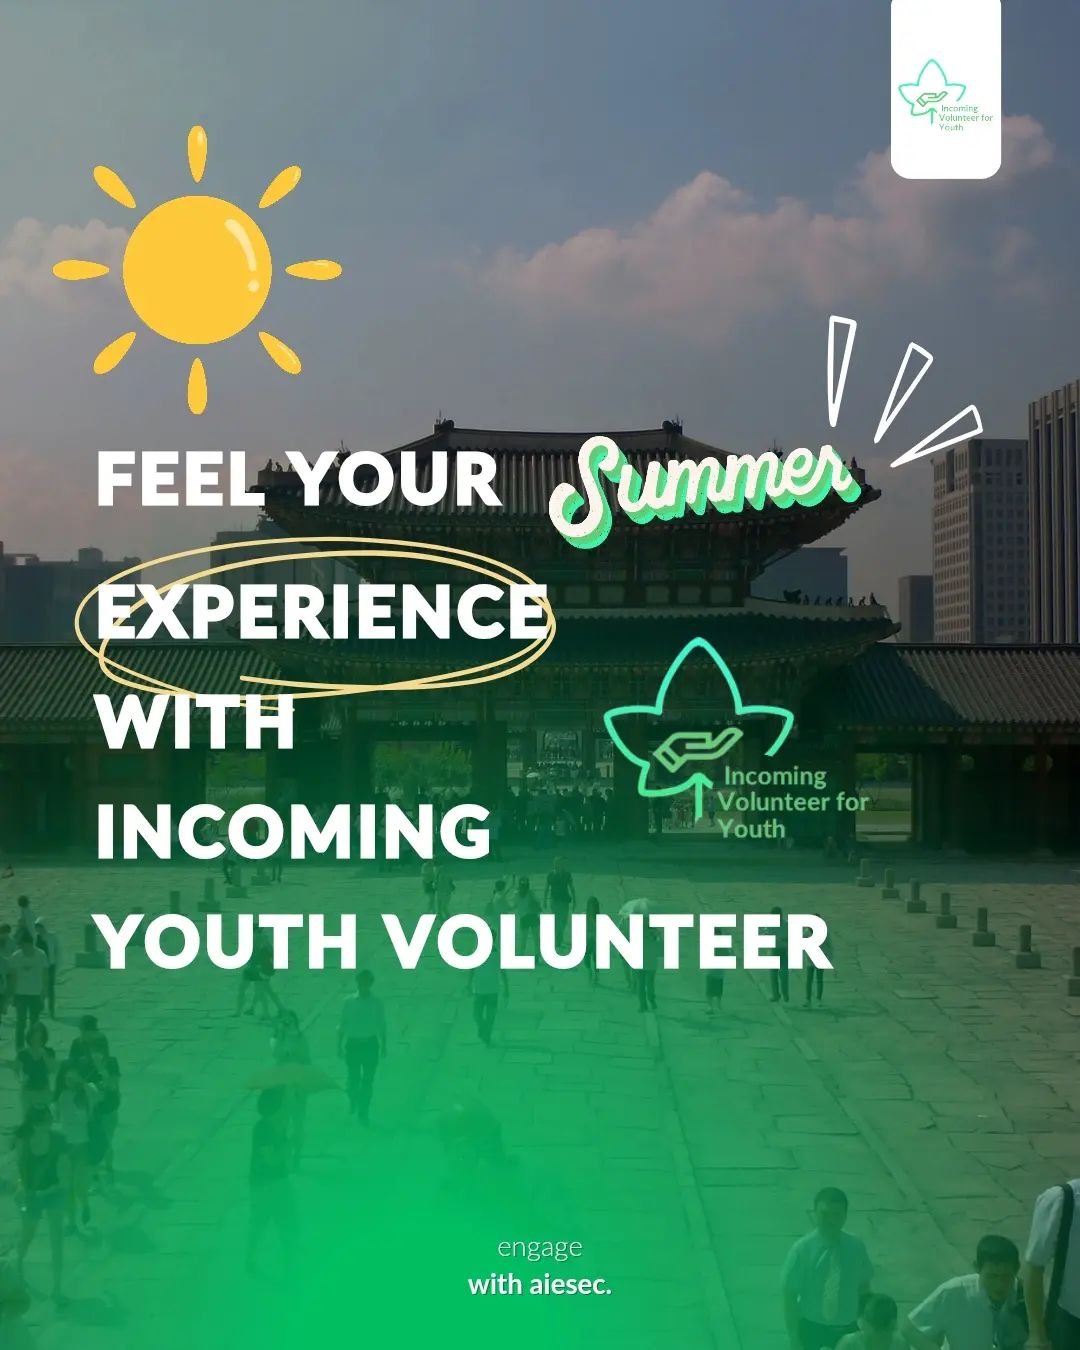 Feel summer project with AIESEC in Korea!
We excited to open Project for you who want contribute to the community in South Korea!

We also will present the project highlight only in here 😊🇰🇷❤️

Experience your summer with IVY

aiesecinkorea.org/in